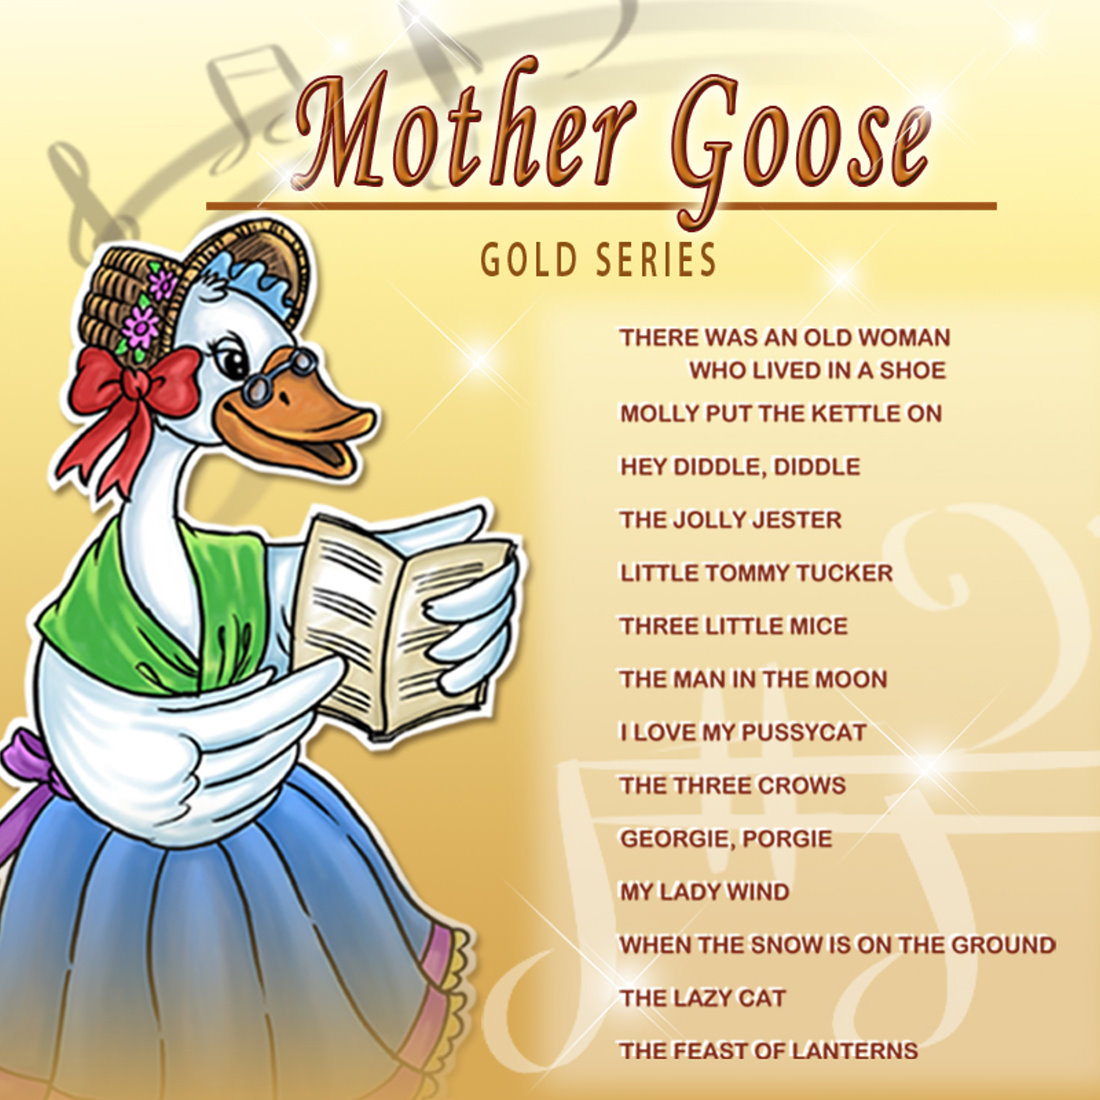 Mother Goose (Gold) - My Kids Songs - CD Disk & MP3 Download